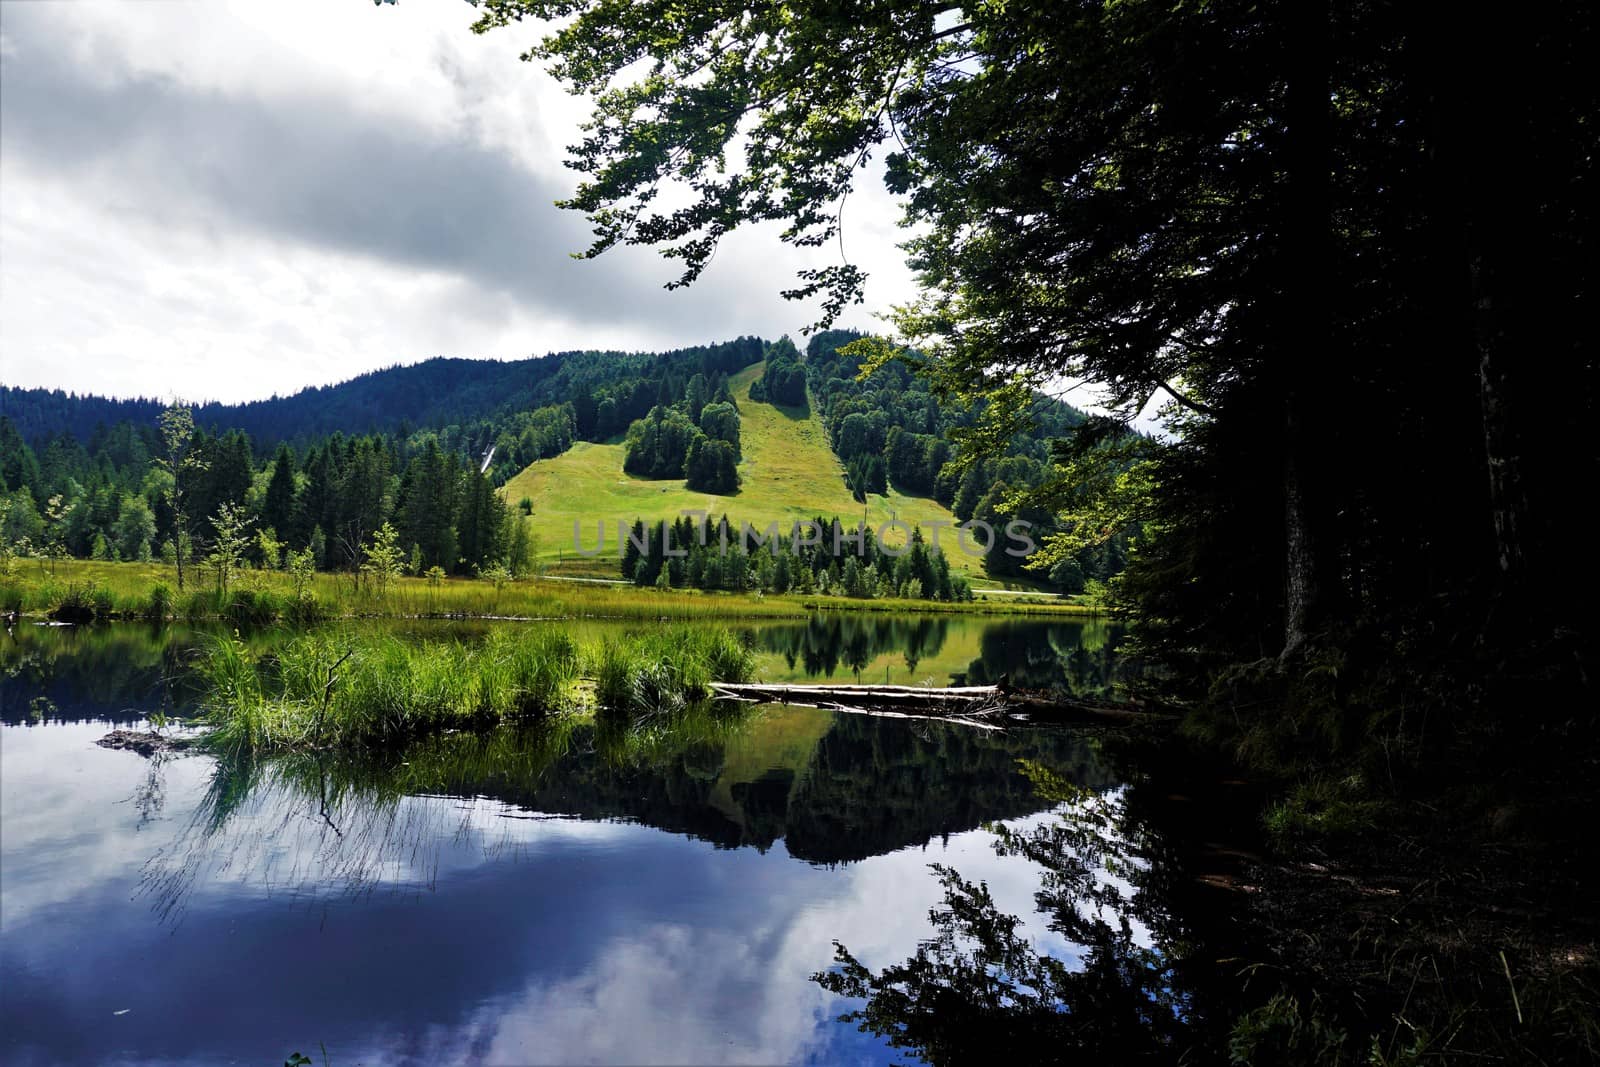 View over Lispach lake in La Bresse, France to hills with slope